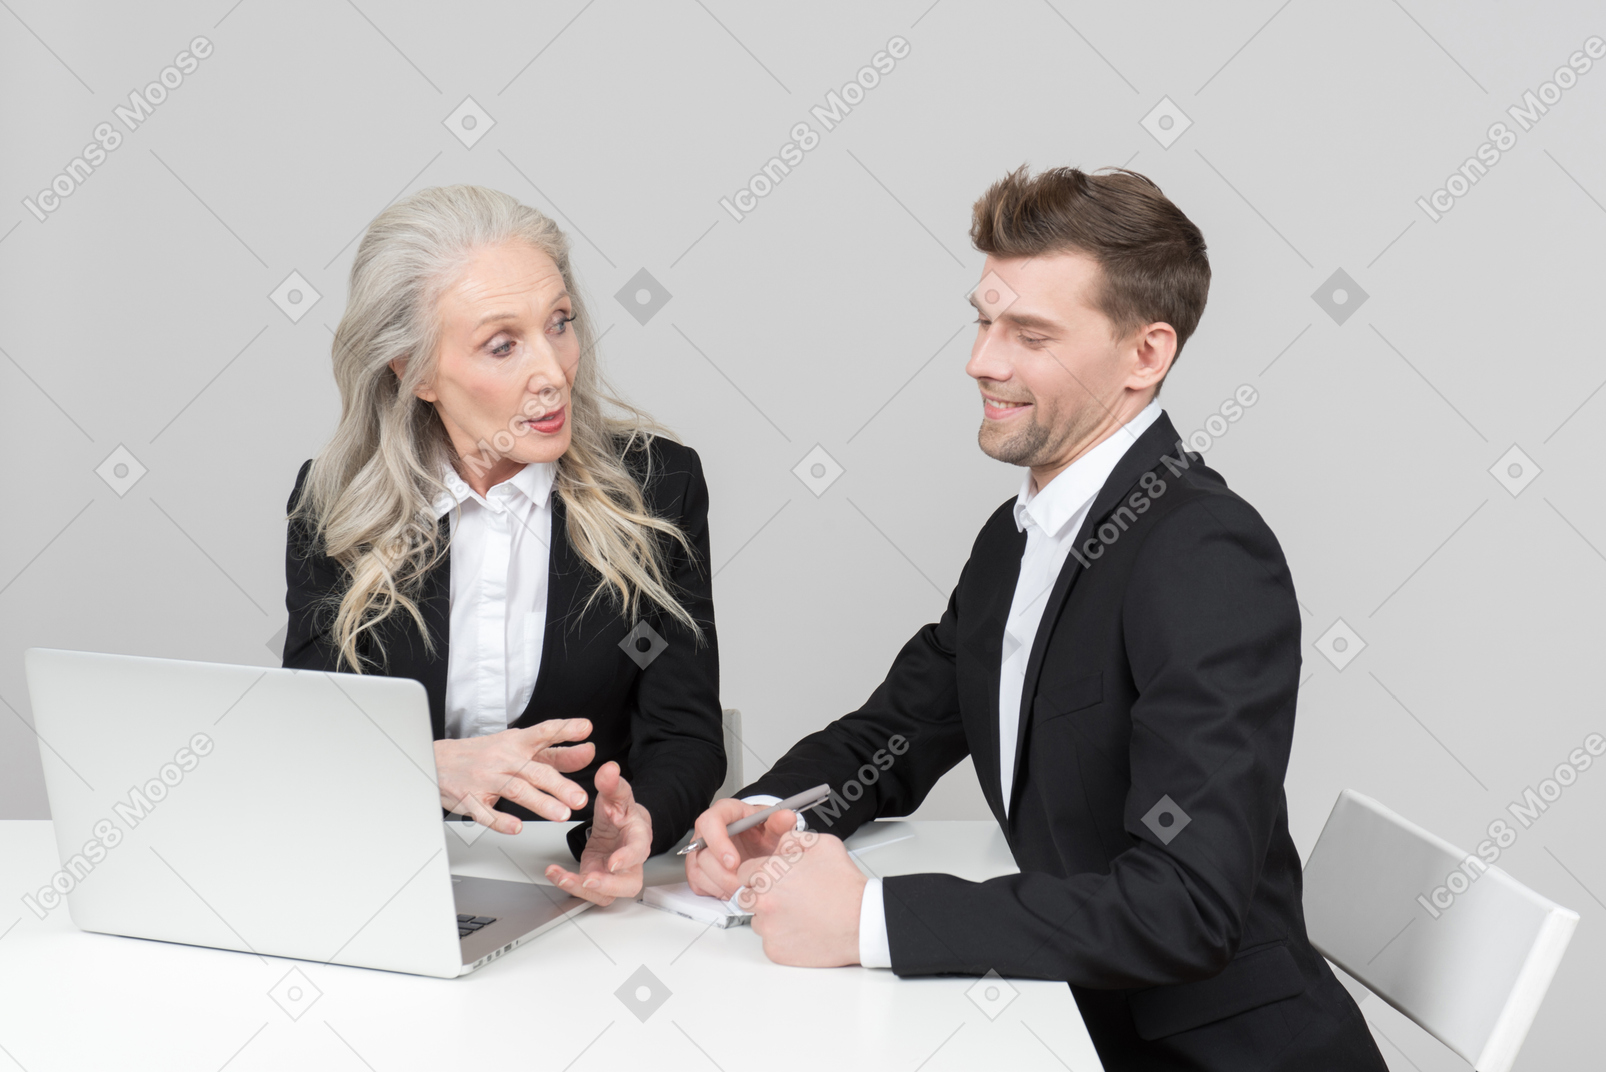 An older woman and a young man working together